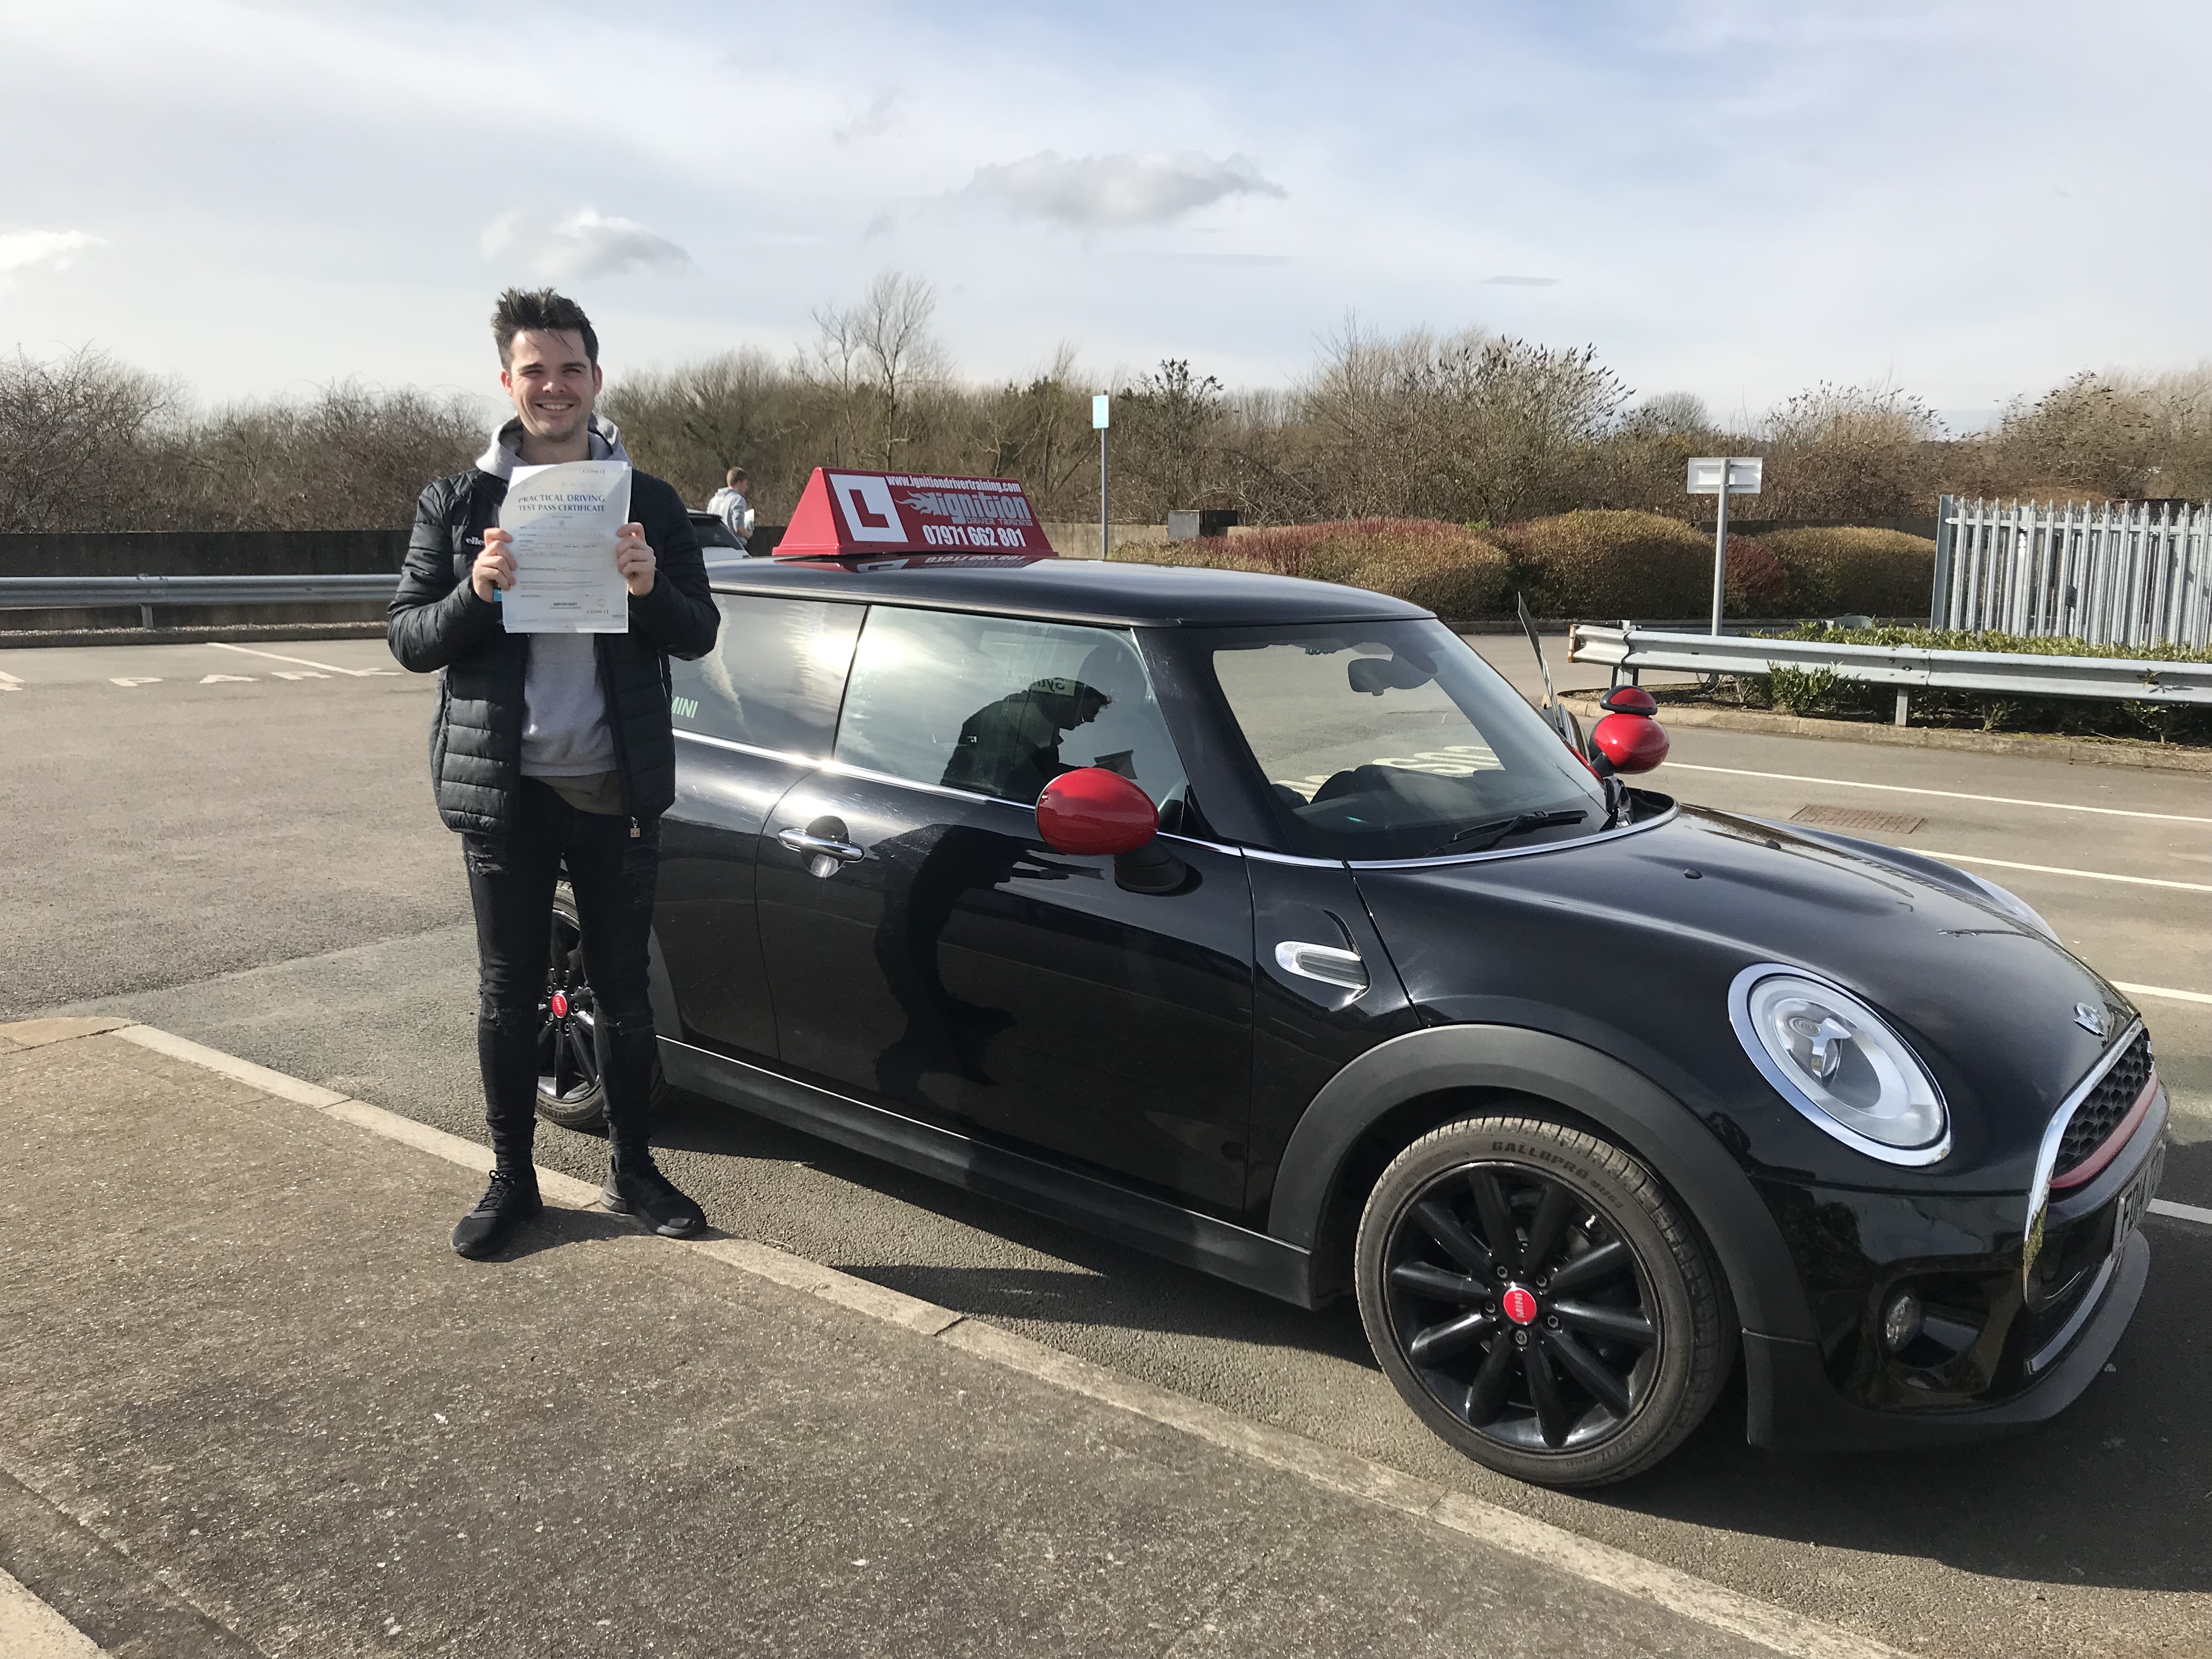 Kyle has passed first time!